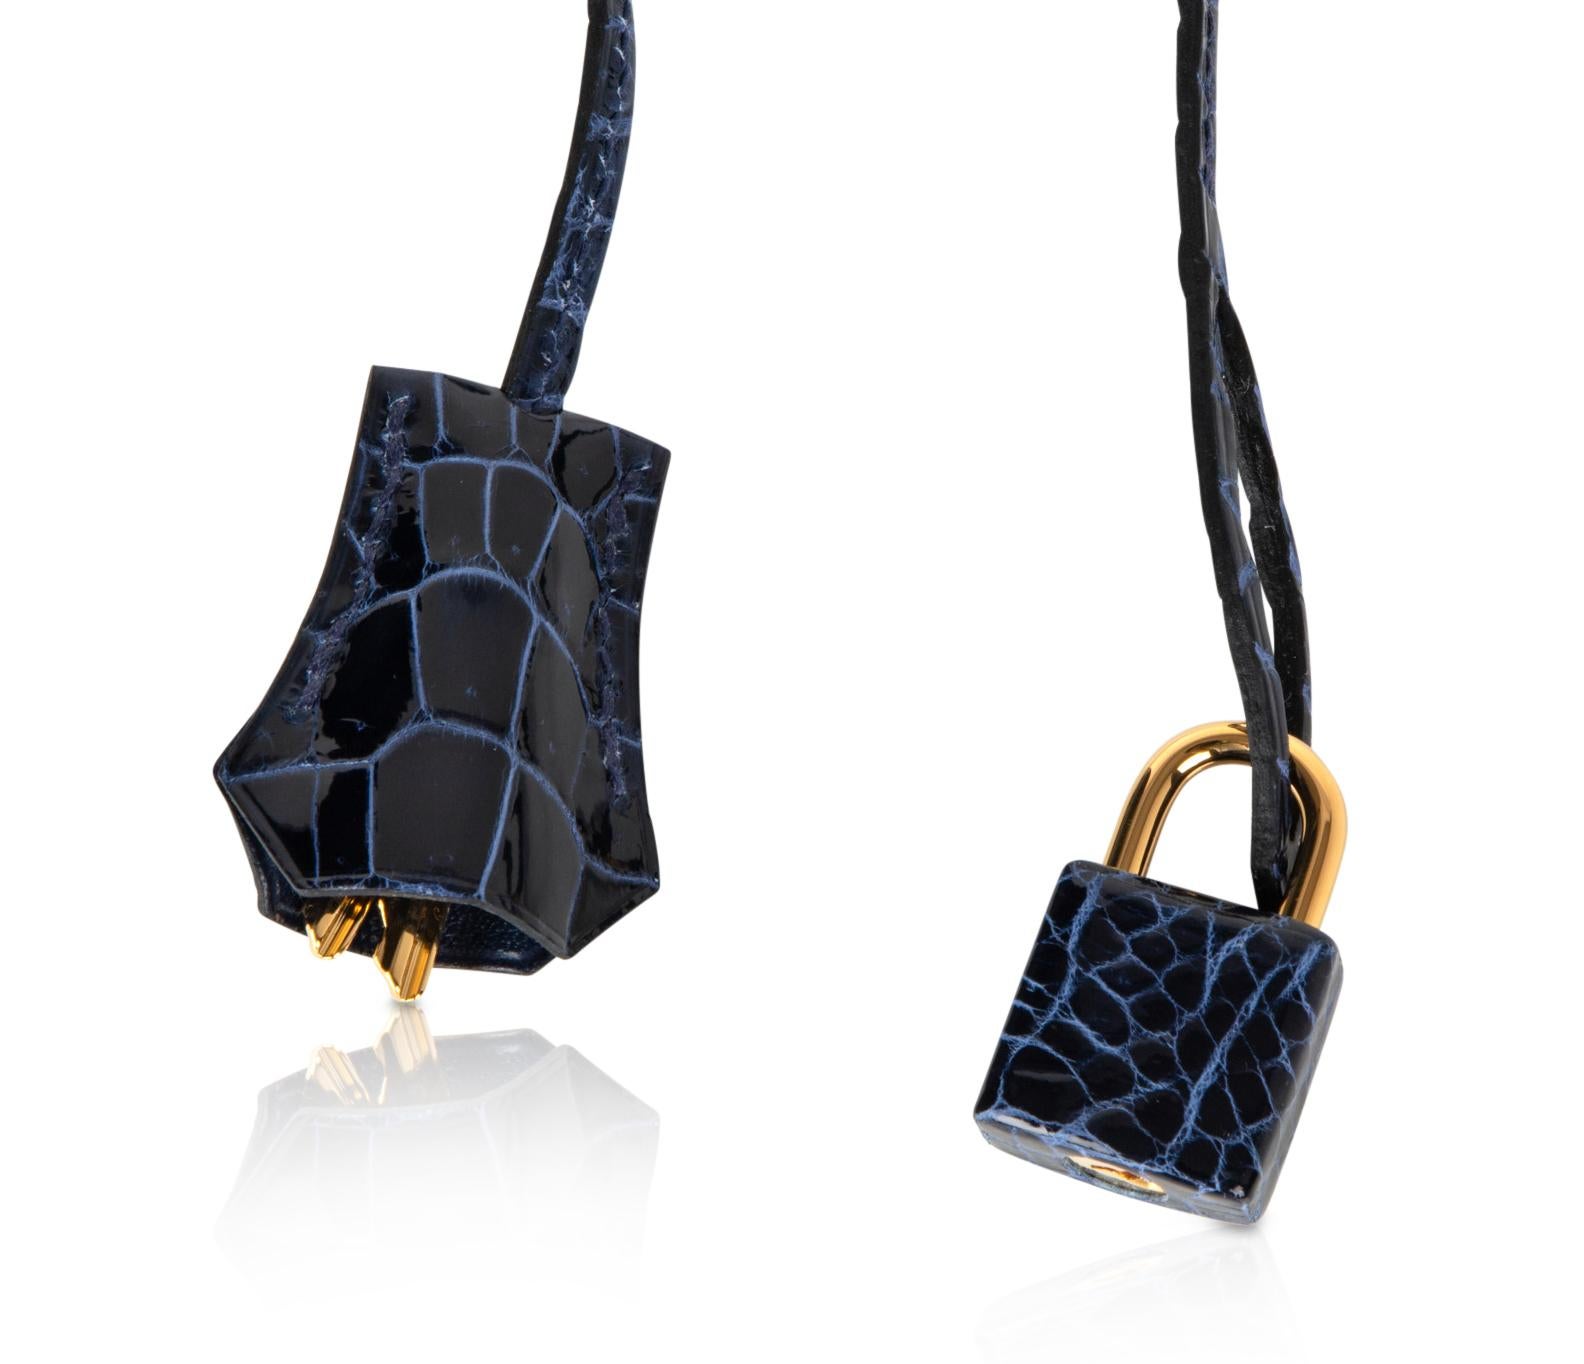 Mightychic offers a guaranteed authentic jewel toned Hermes Birkin 35 bag featured in Blue Sapphire Porosus Crocodile. 
This Hermes Birkin is not unlike a faceted sapphire.  A gorgeous jewel.
Lush with Gold hardware.
Comes with lock and keys in the